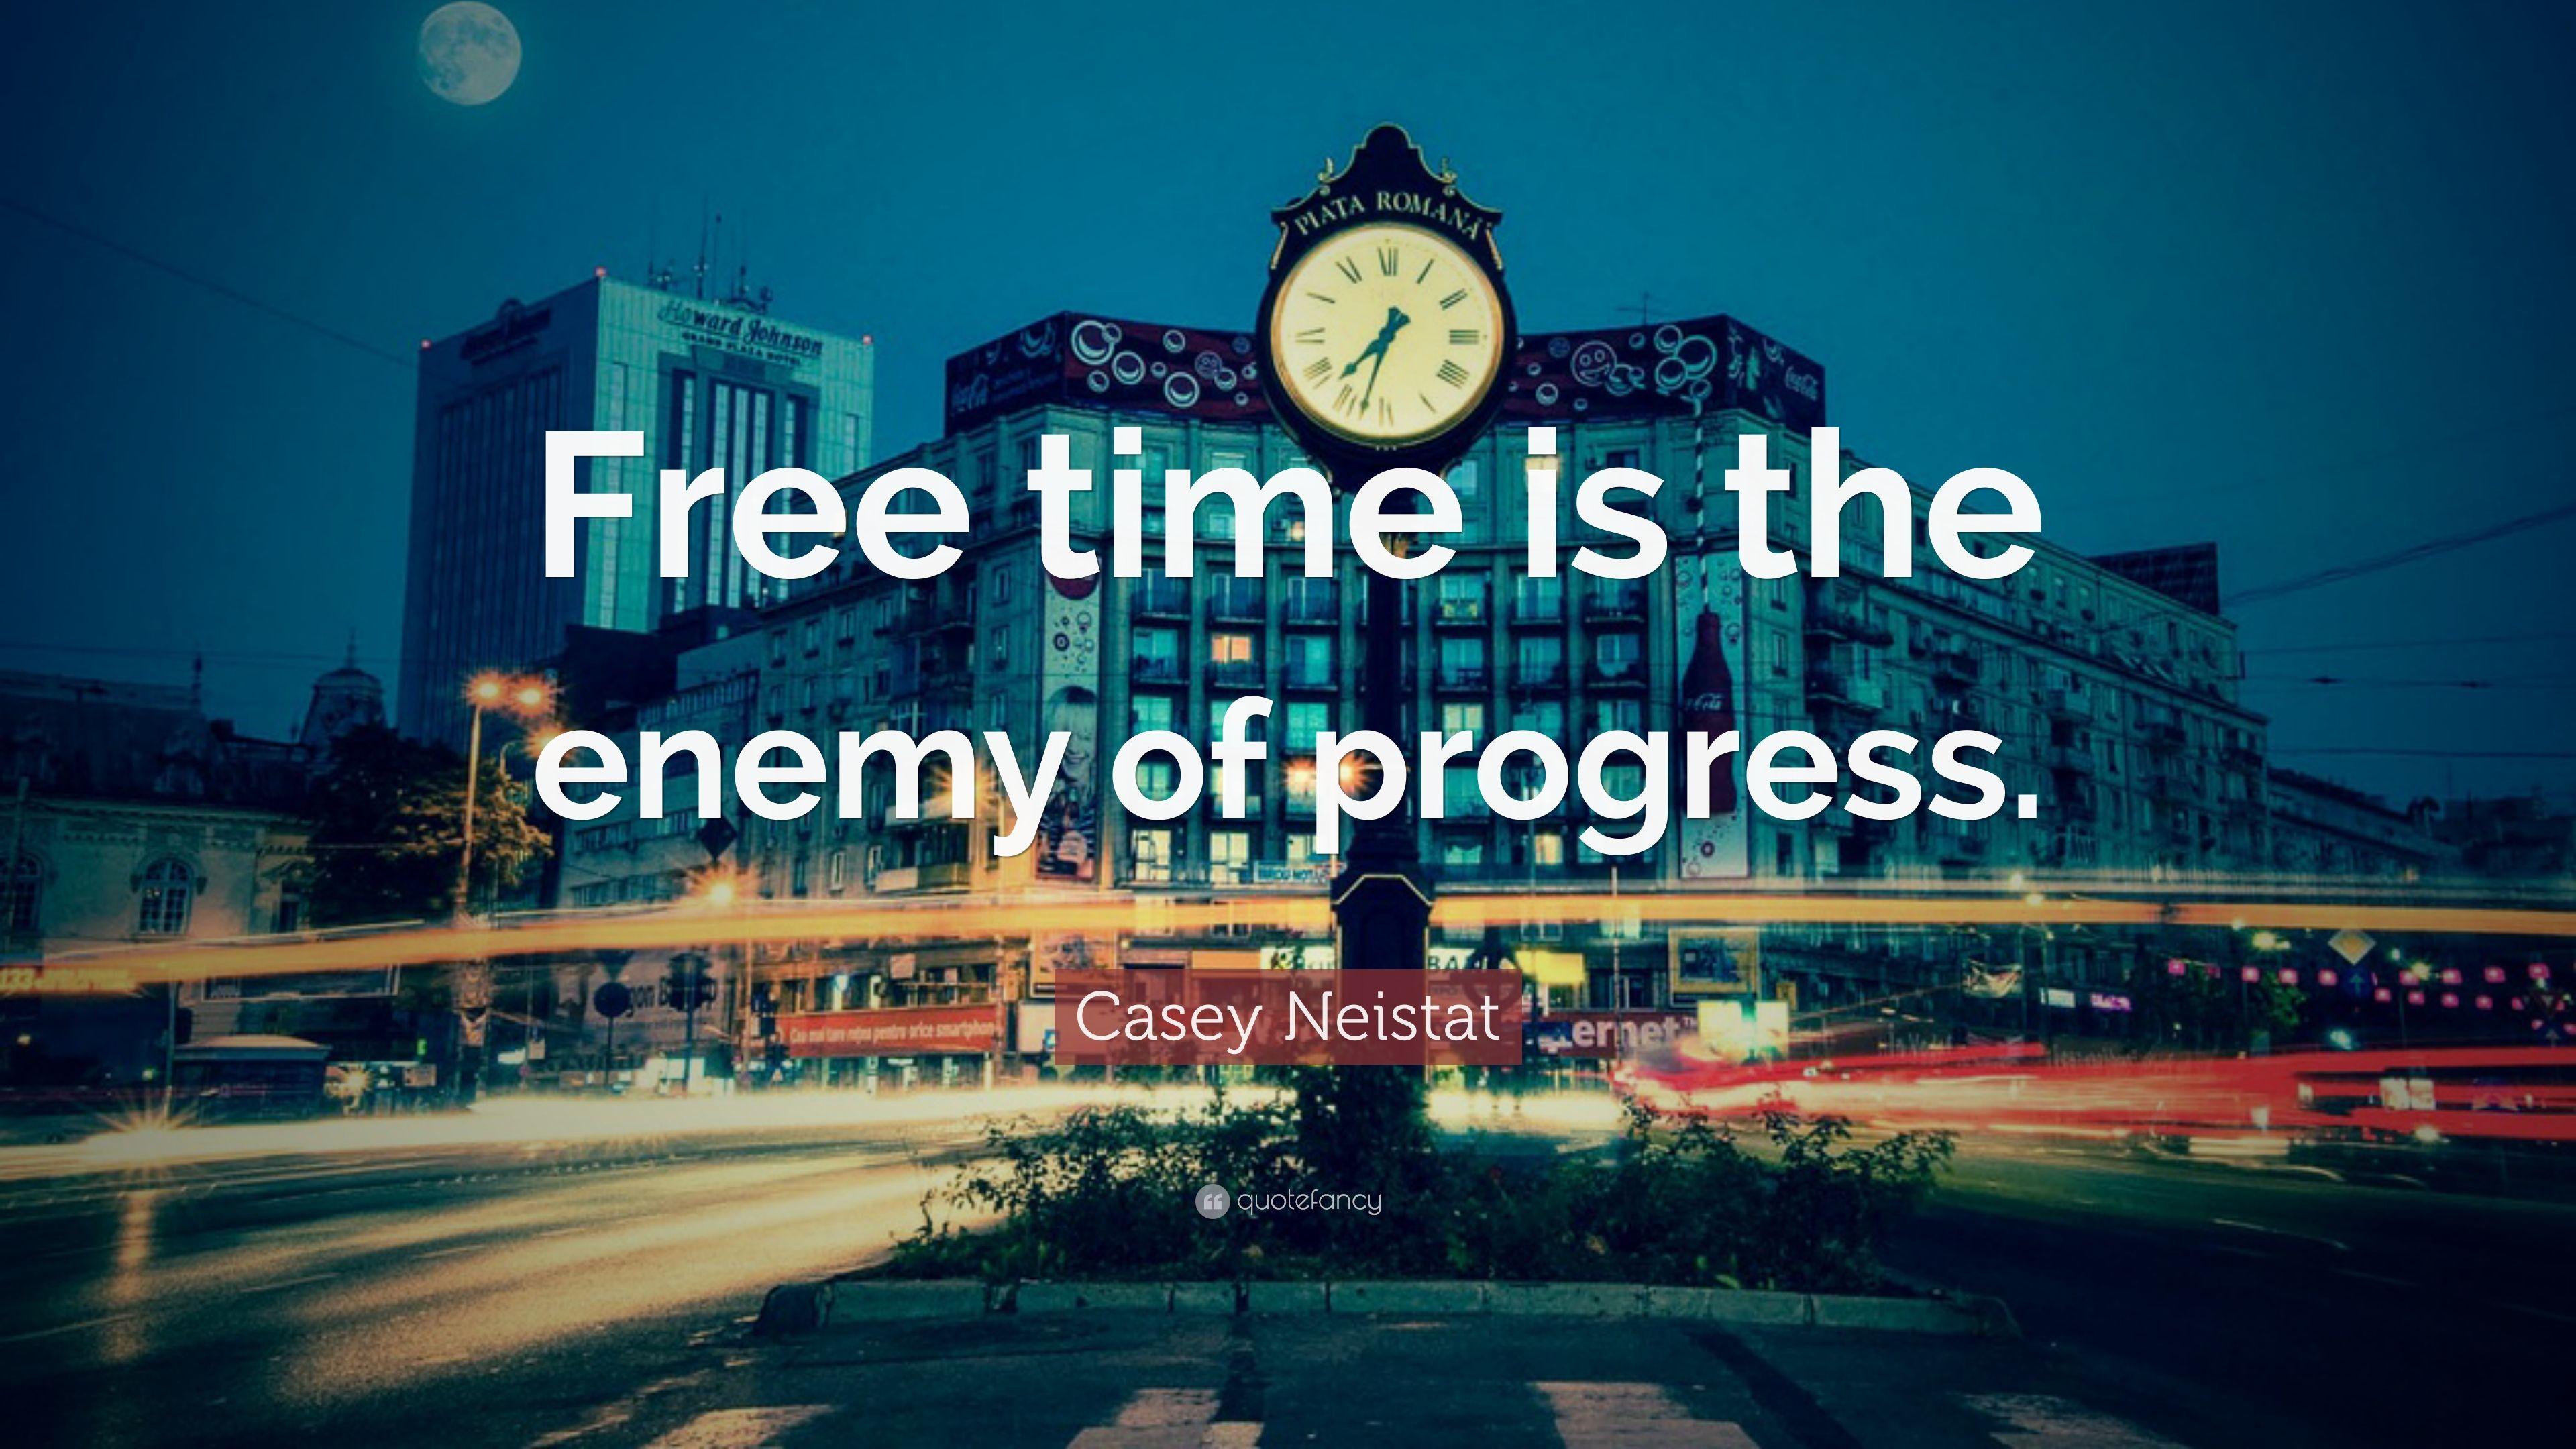 Casey Neistat Quote: “Free time is the enemy of progress.” 26